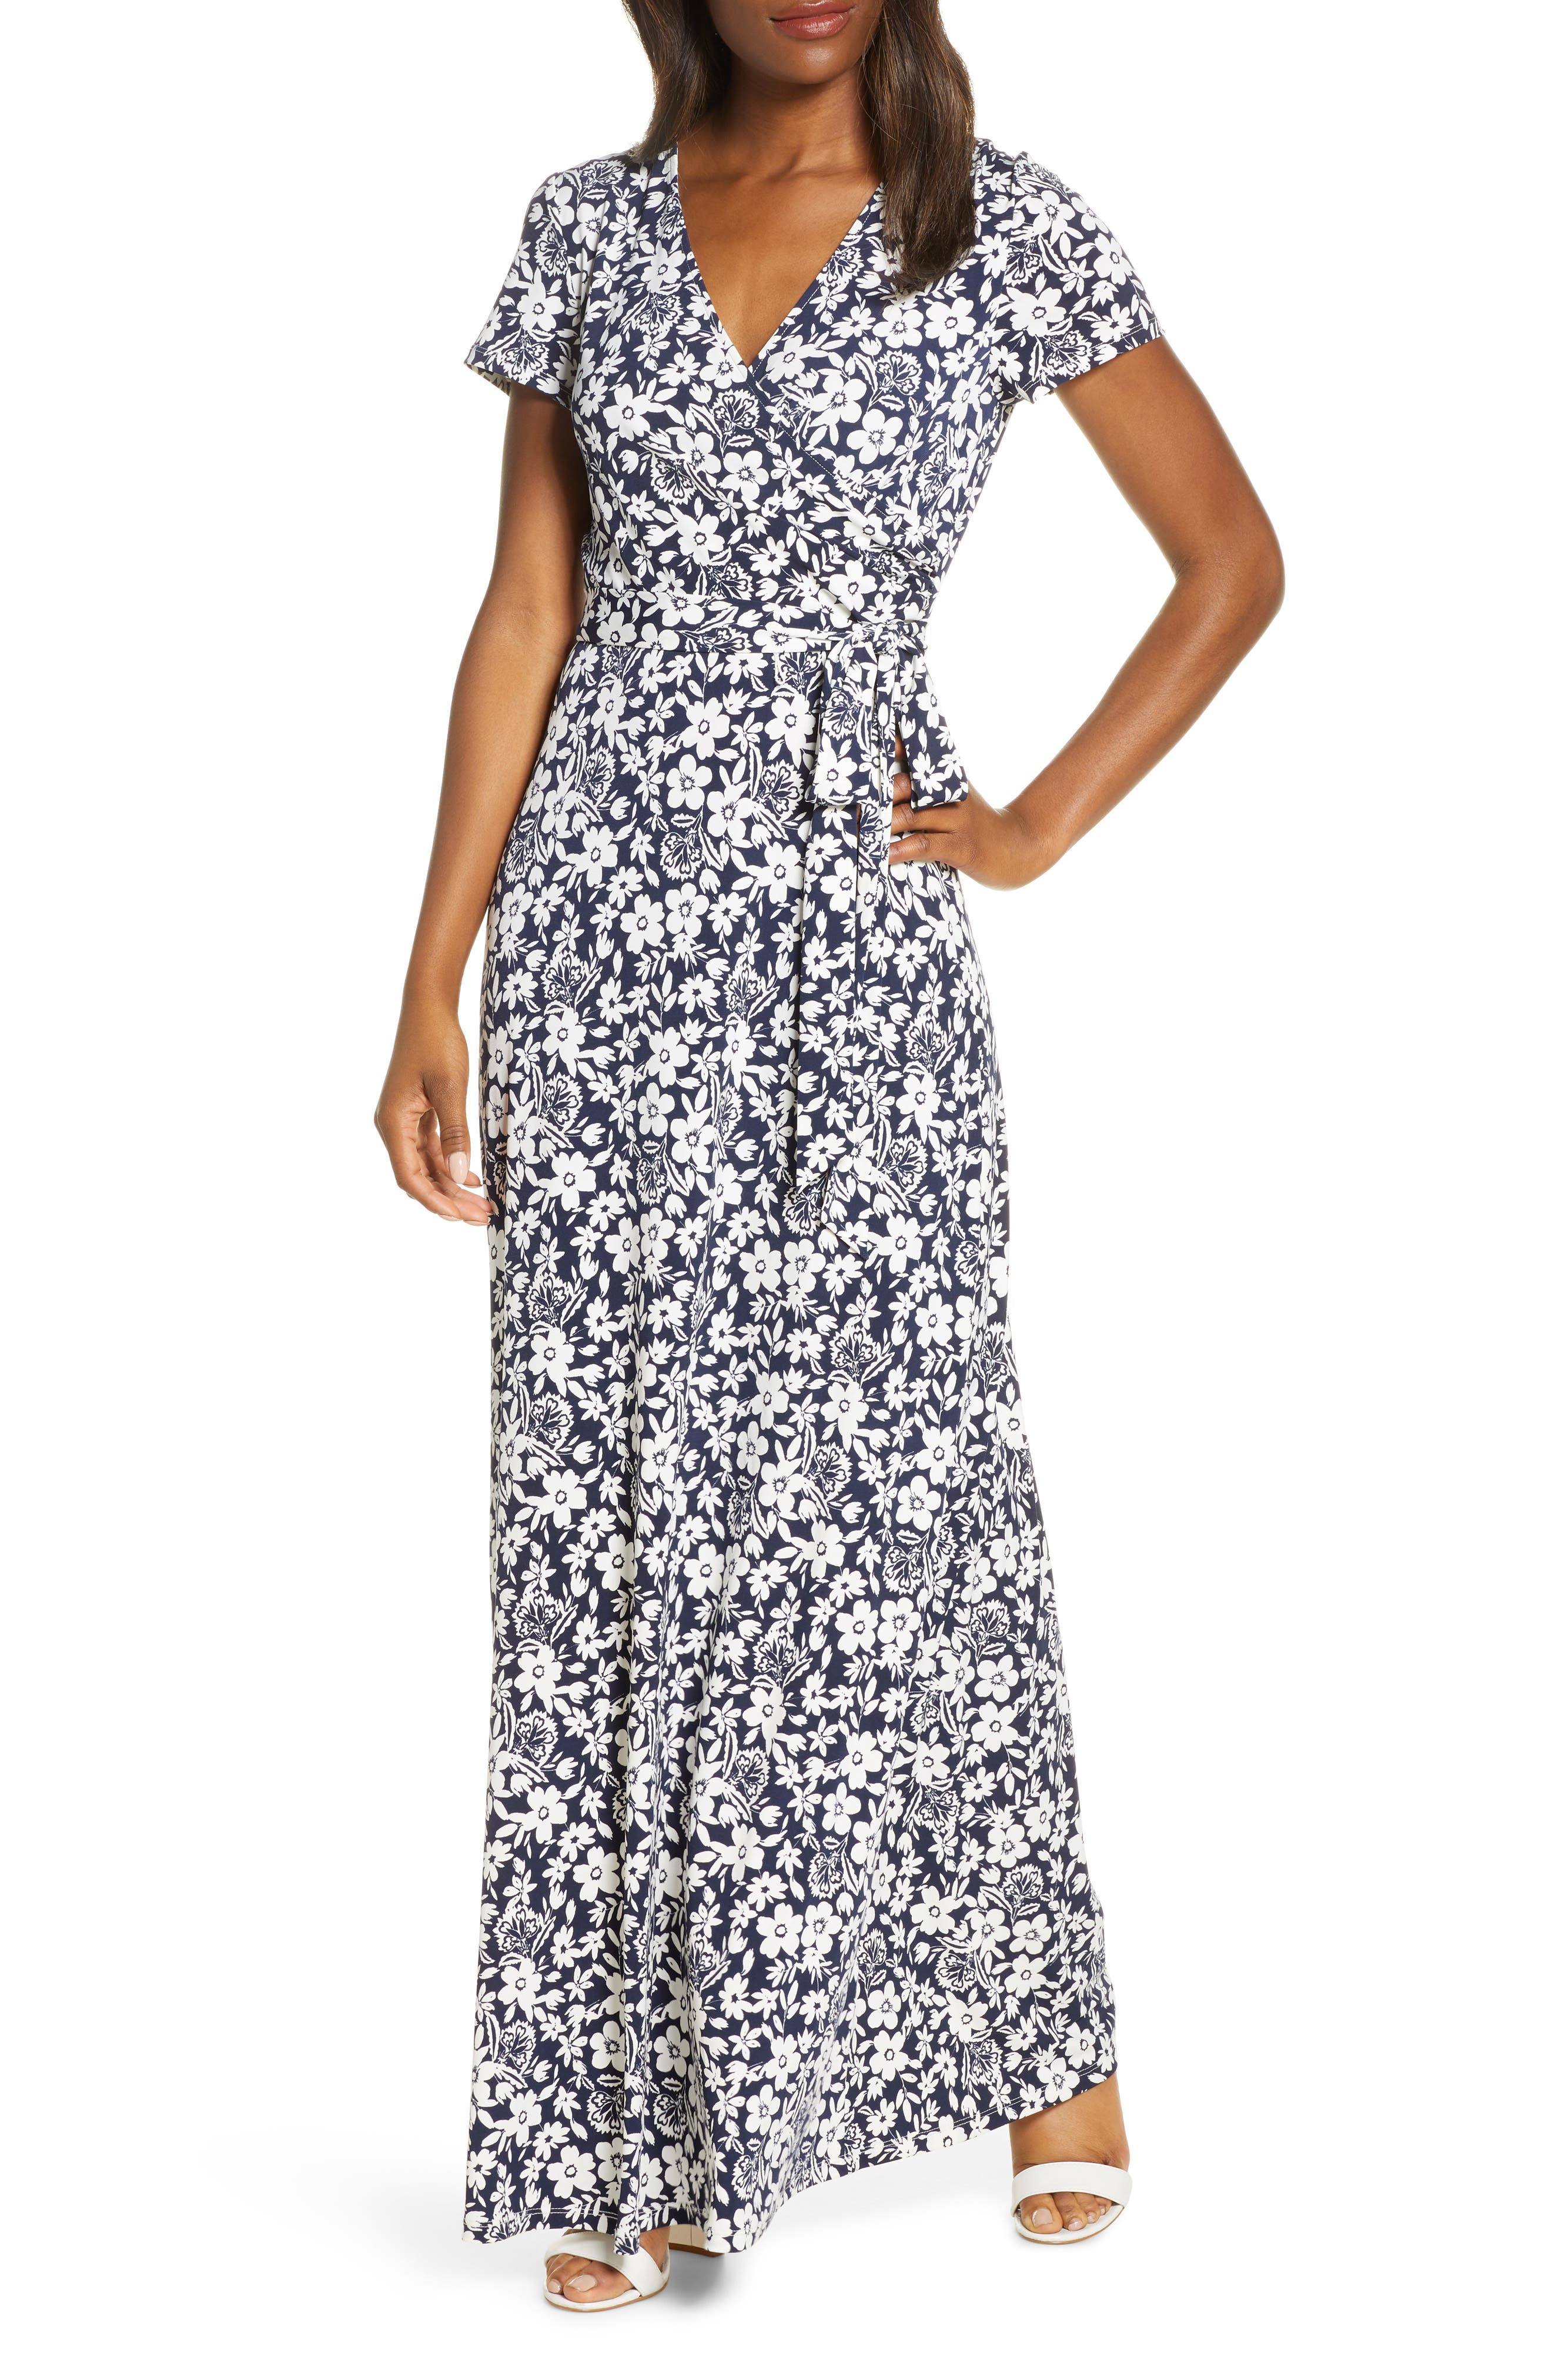 floral maxi dresses for weddings